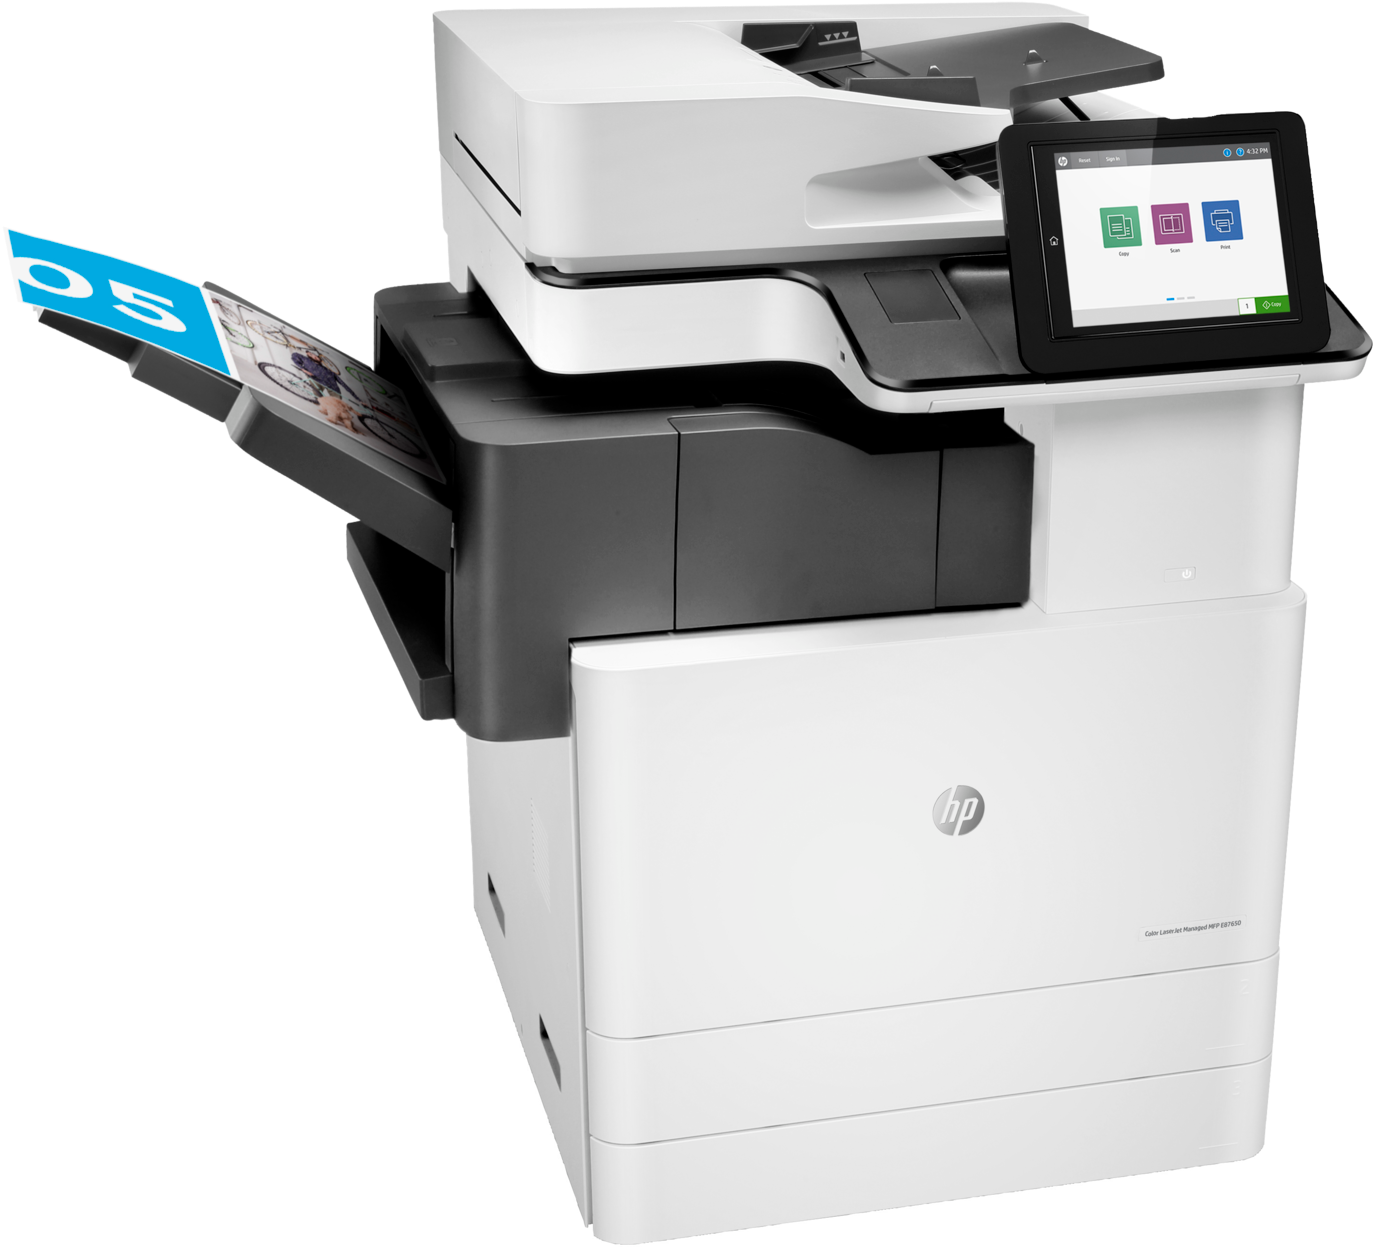 A White And Grey Printer With A Screen